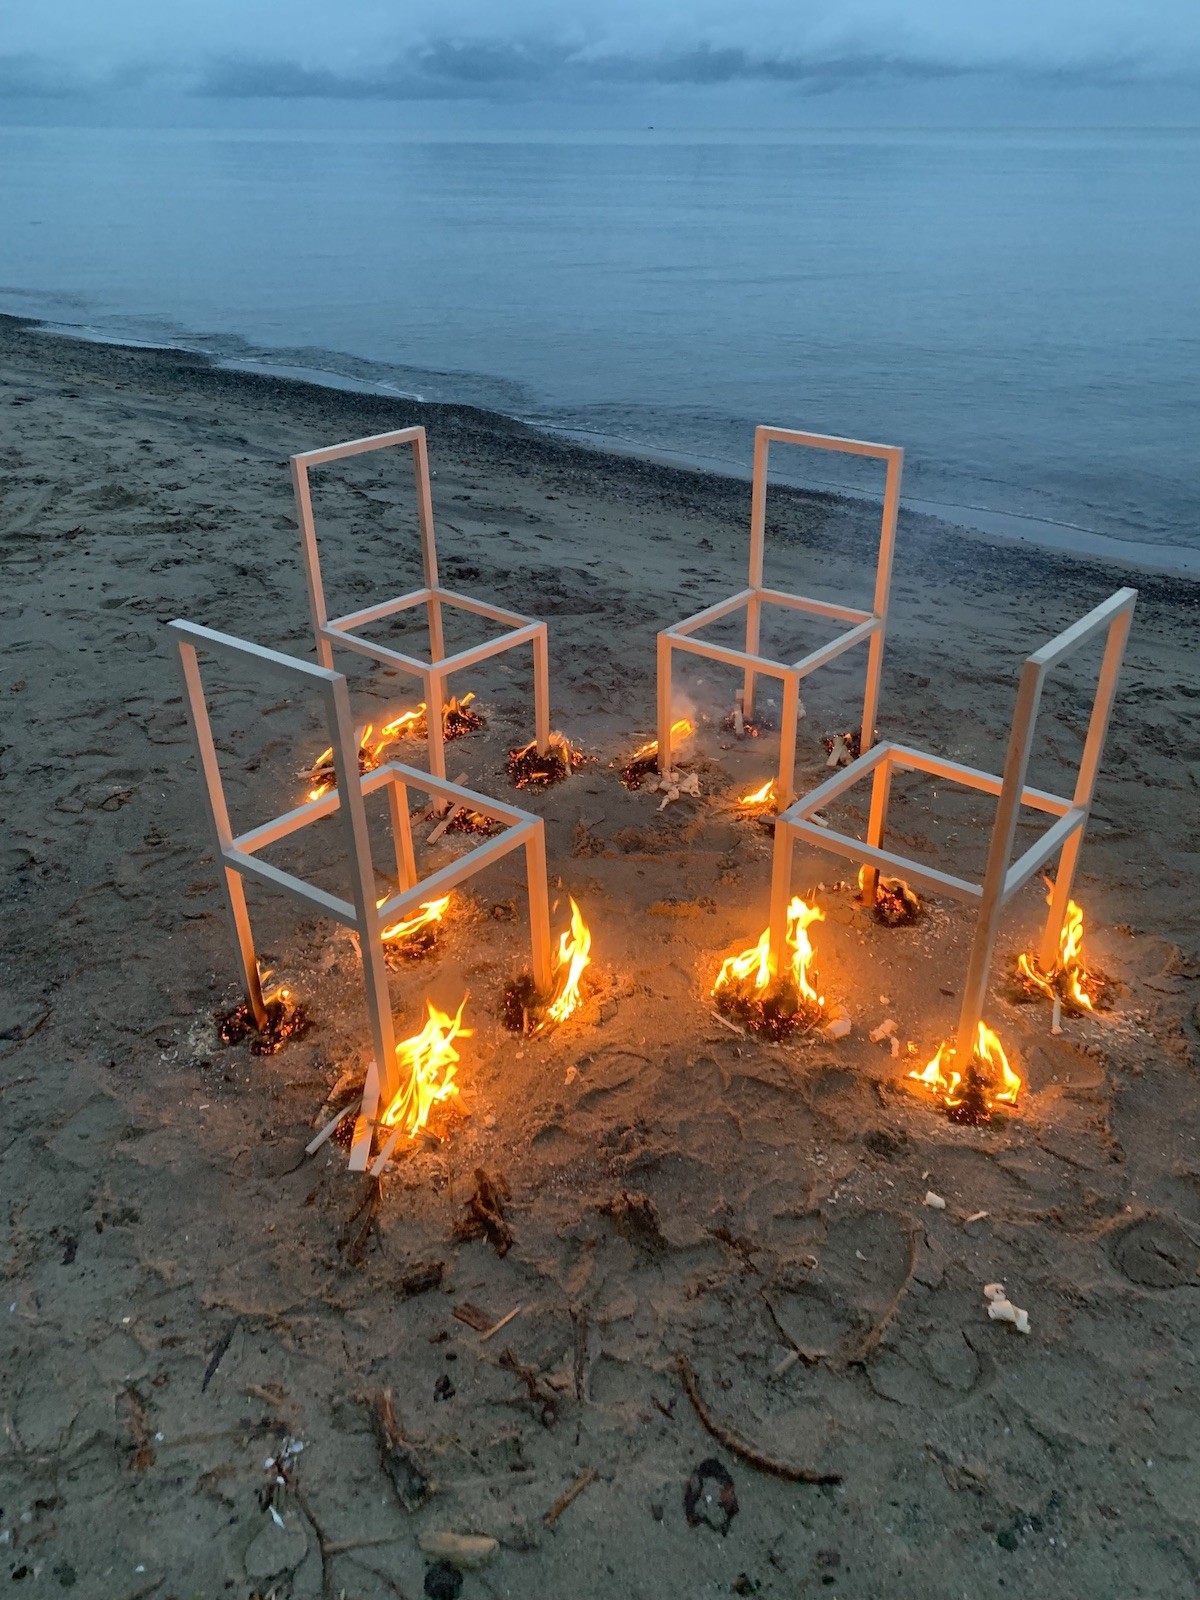 a group of five wood chairs that are on fire arranged in a circle on a sandy beach with blue water along the shore.